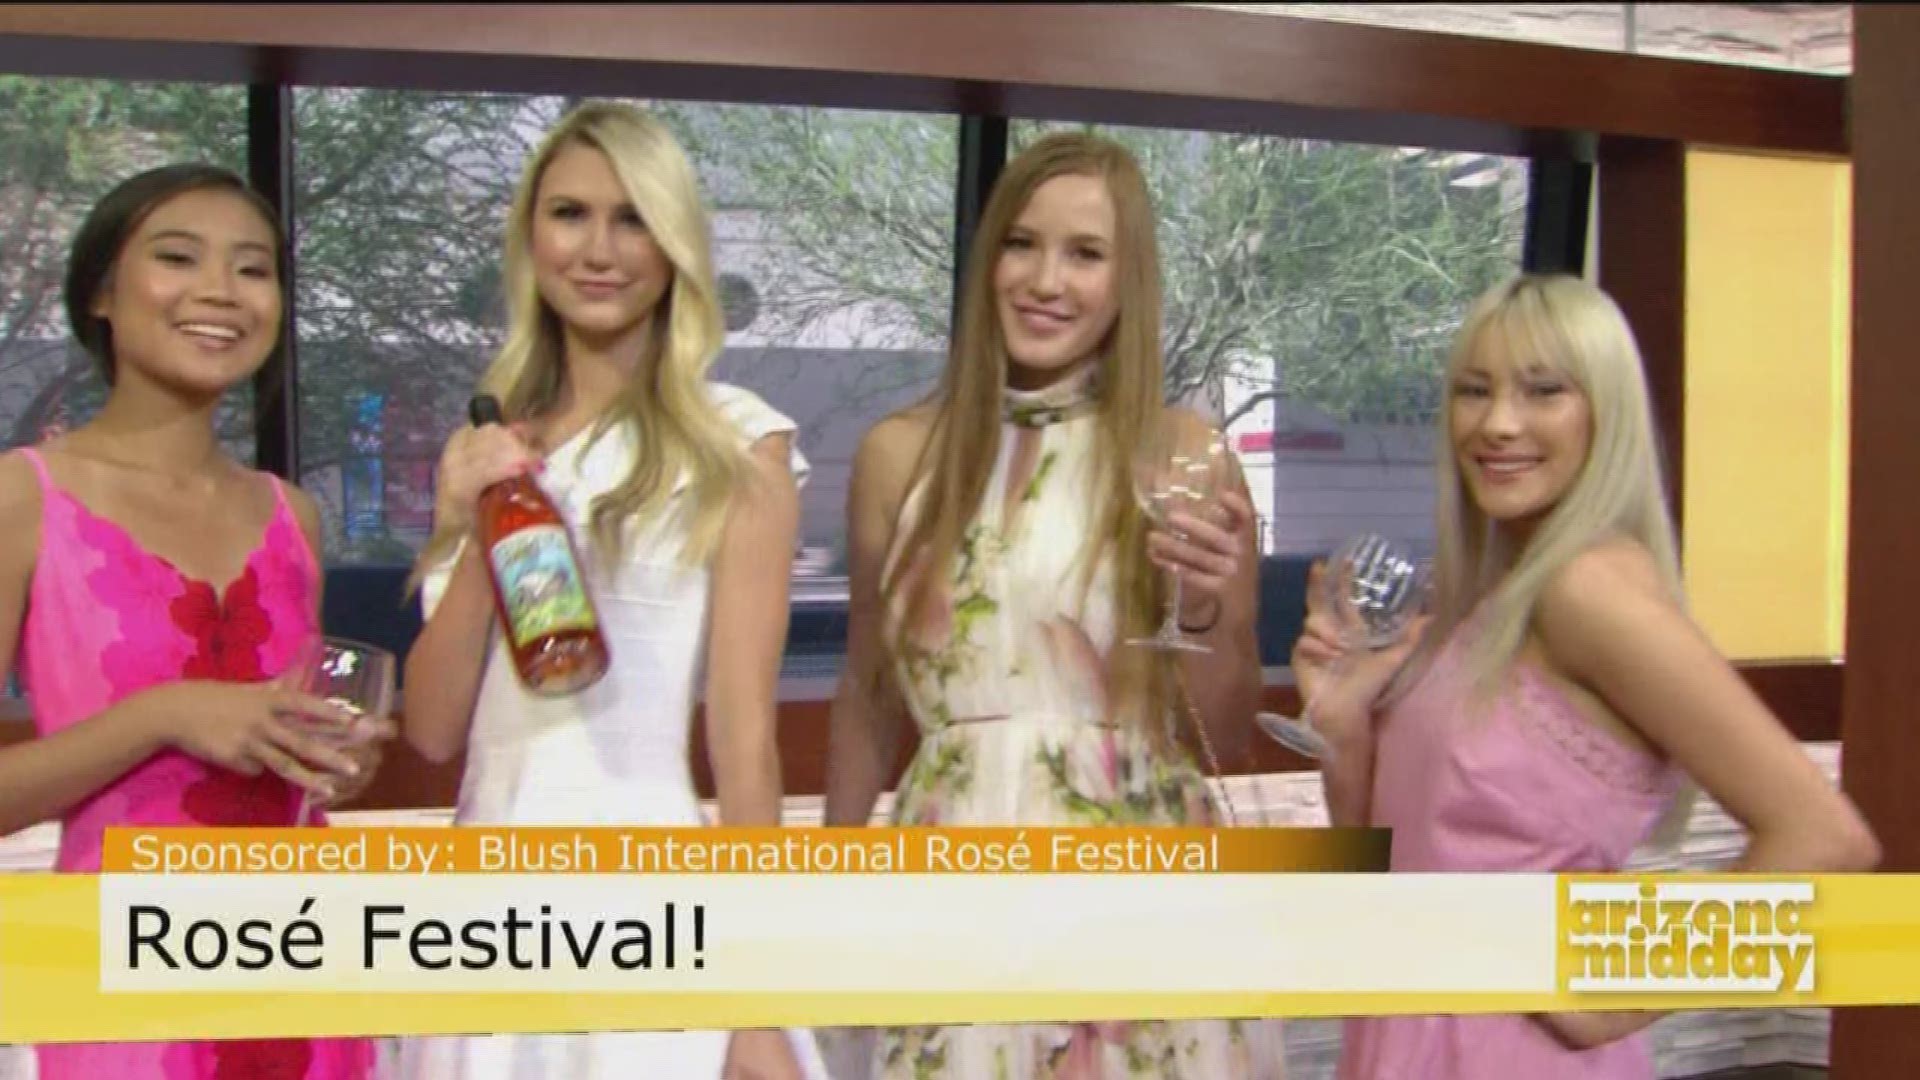 Drink rose all day at Arizona's first international rose festival! Karrah Van Kammen tells us why it's the perfect event for you.